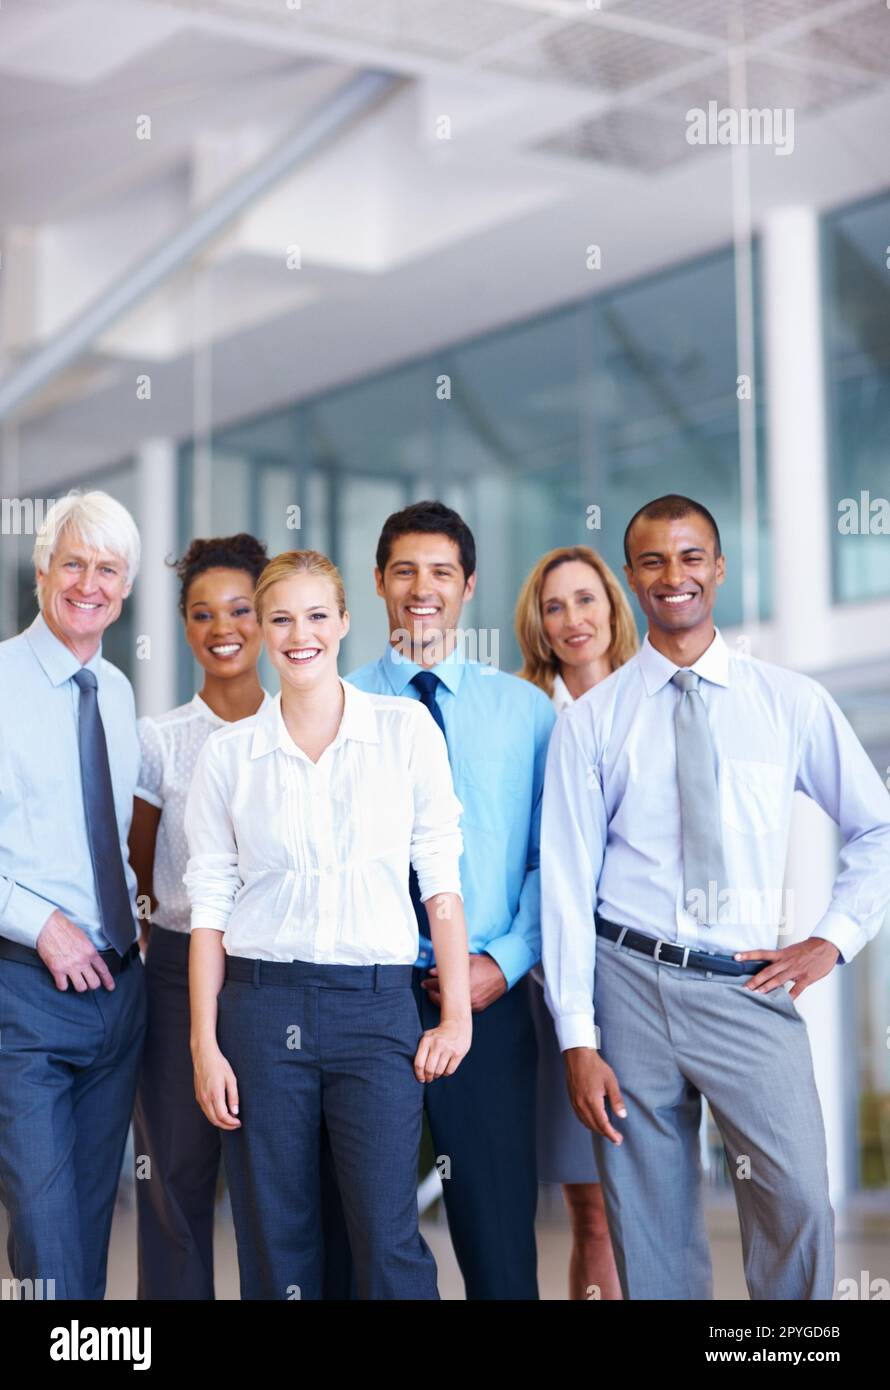 The team. Portrait of multi ethnic business team smiling together at office. Stock Photo